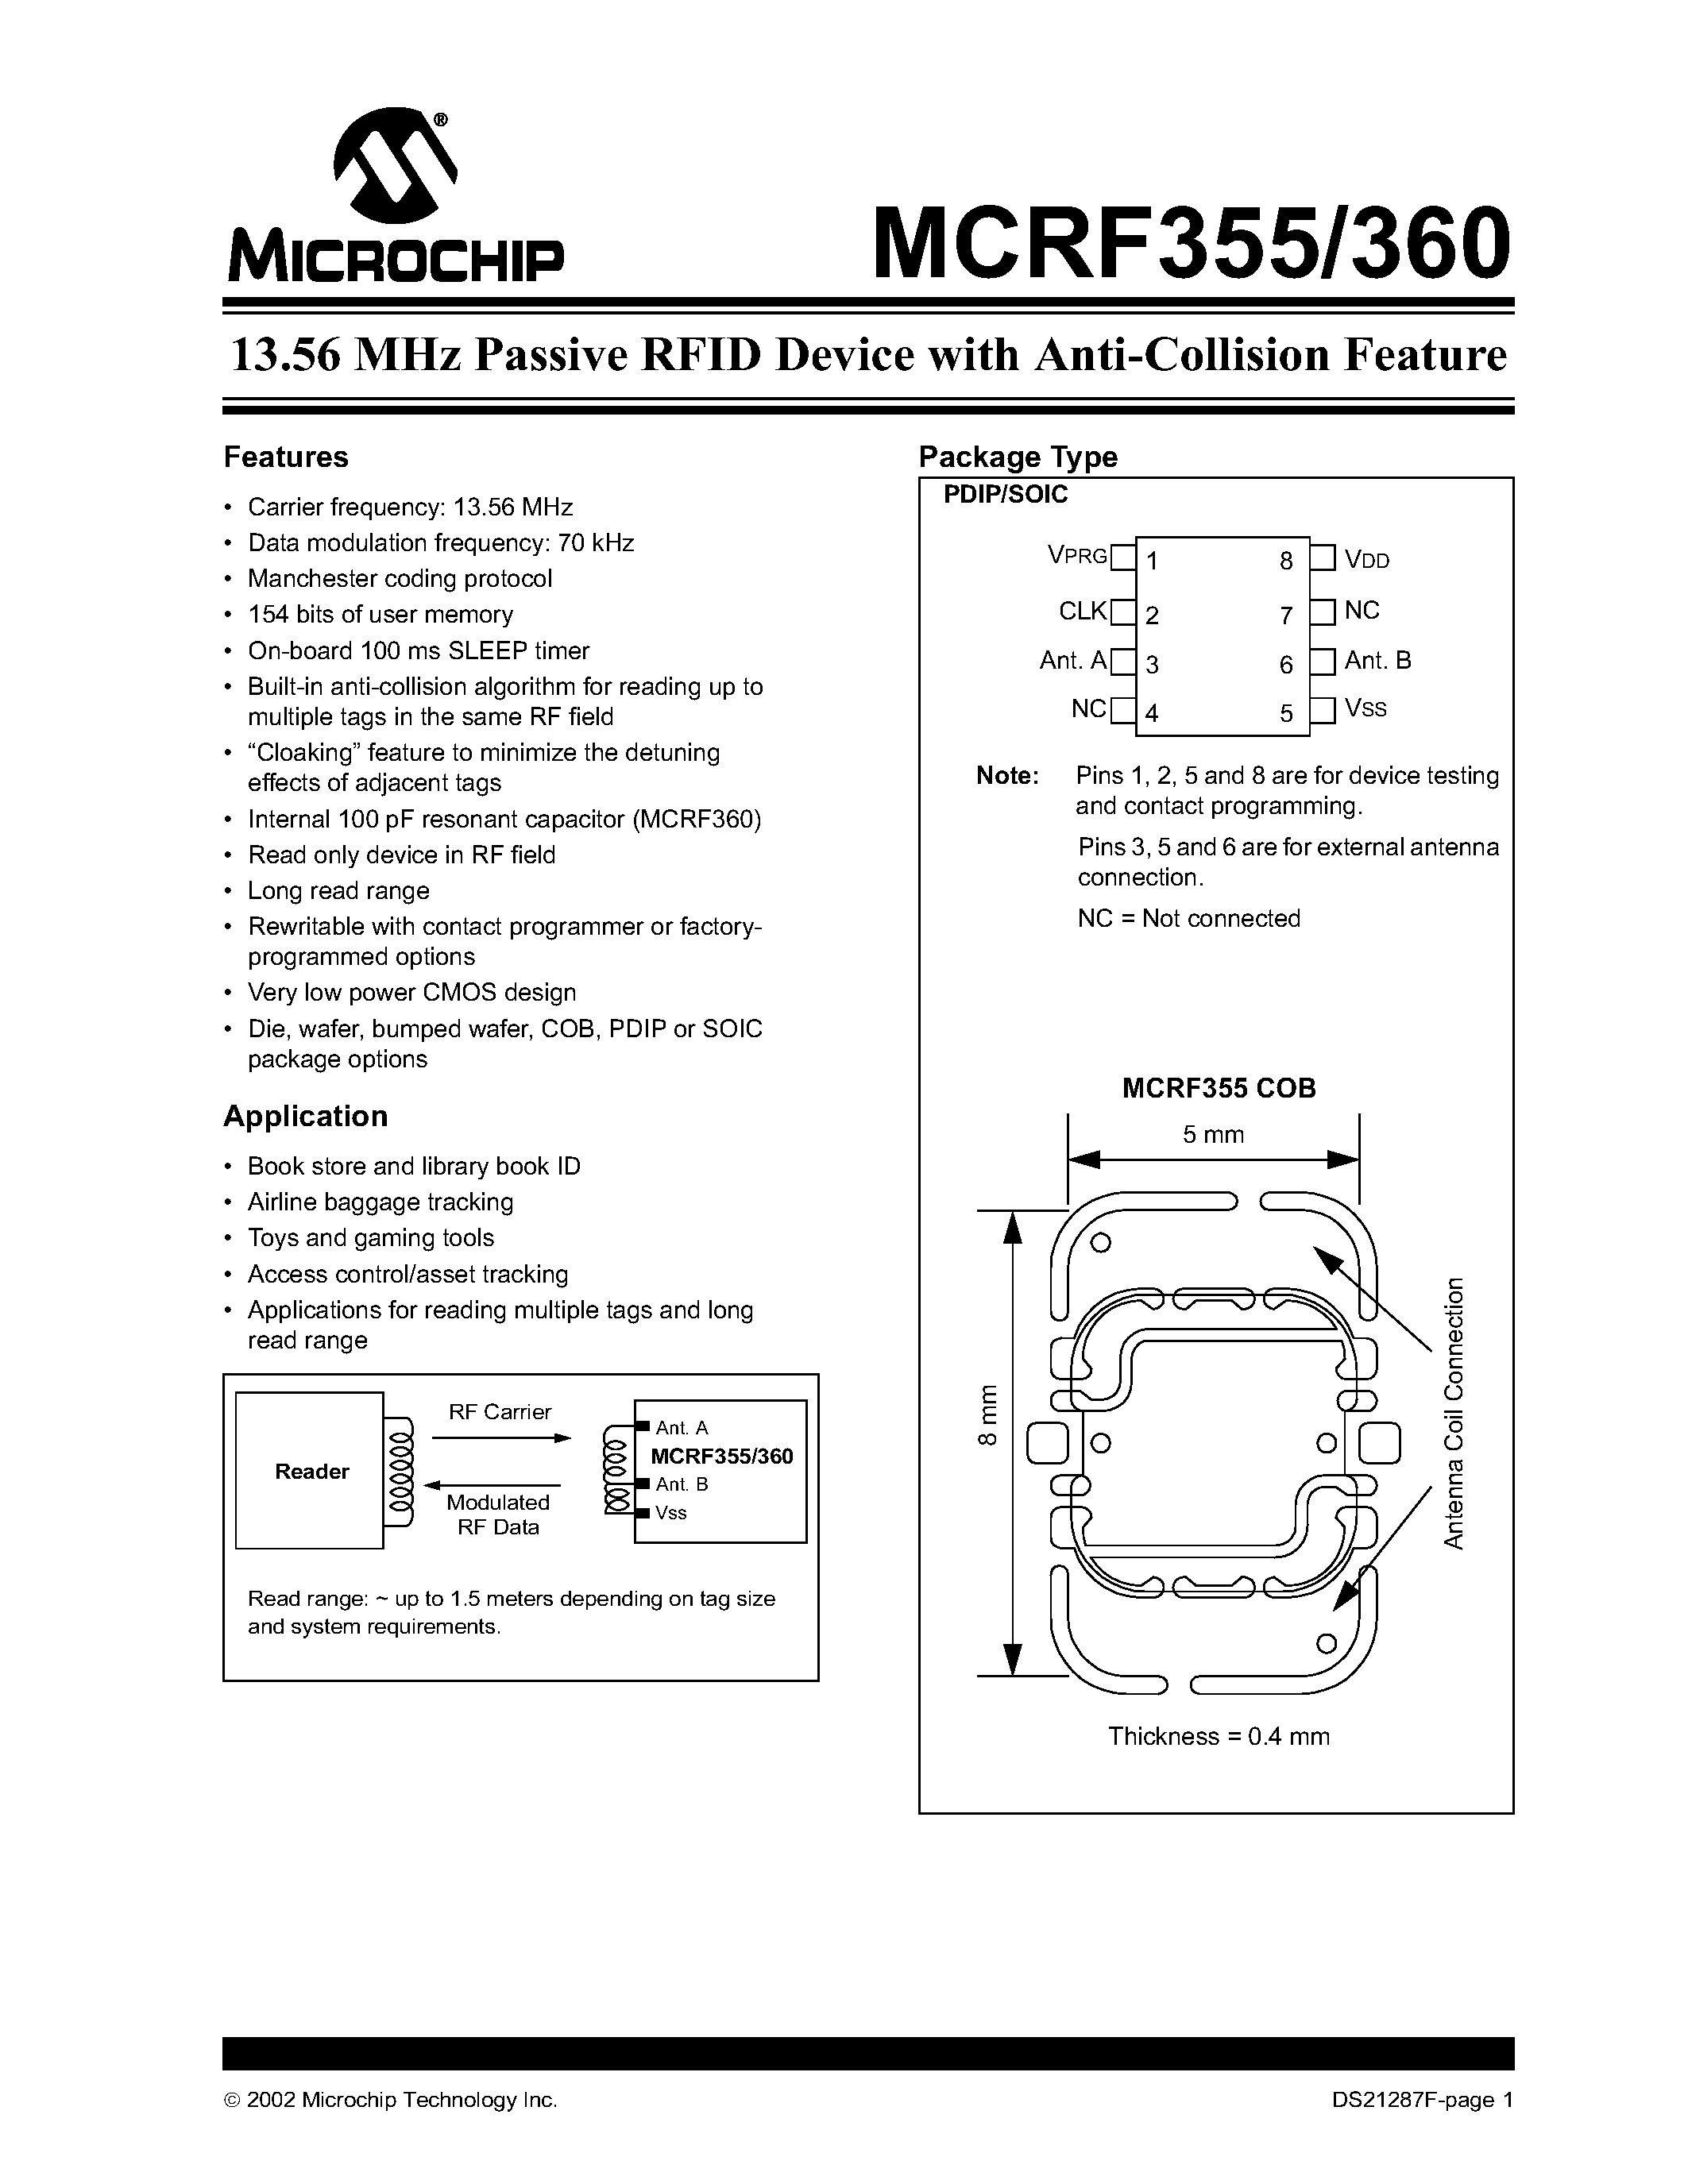 Datasheet MCRF360 - 13.56 MHz Passive RFID Device with Anti-Collision Feature page 1